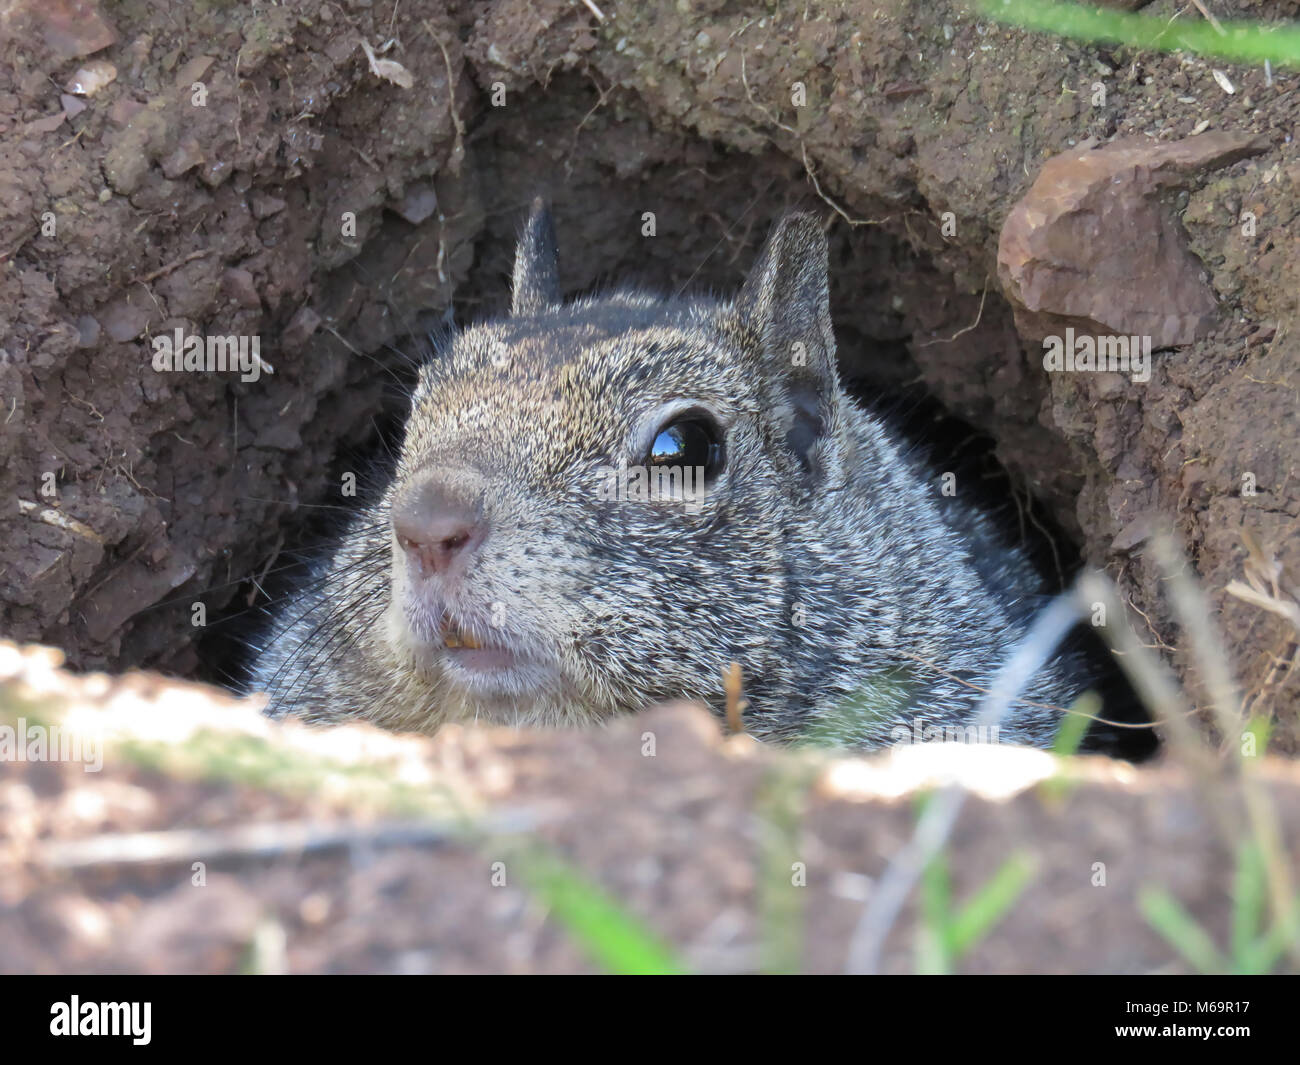 Cautious California ground squirrel (Otospermophilus beecheyi) peeking out of its burrow, teeth are visible Stock Photo